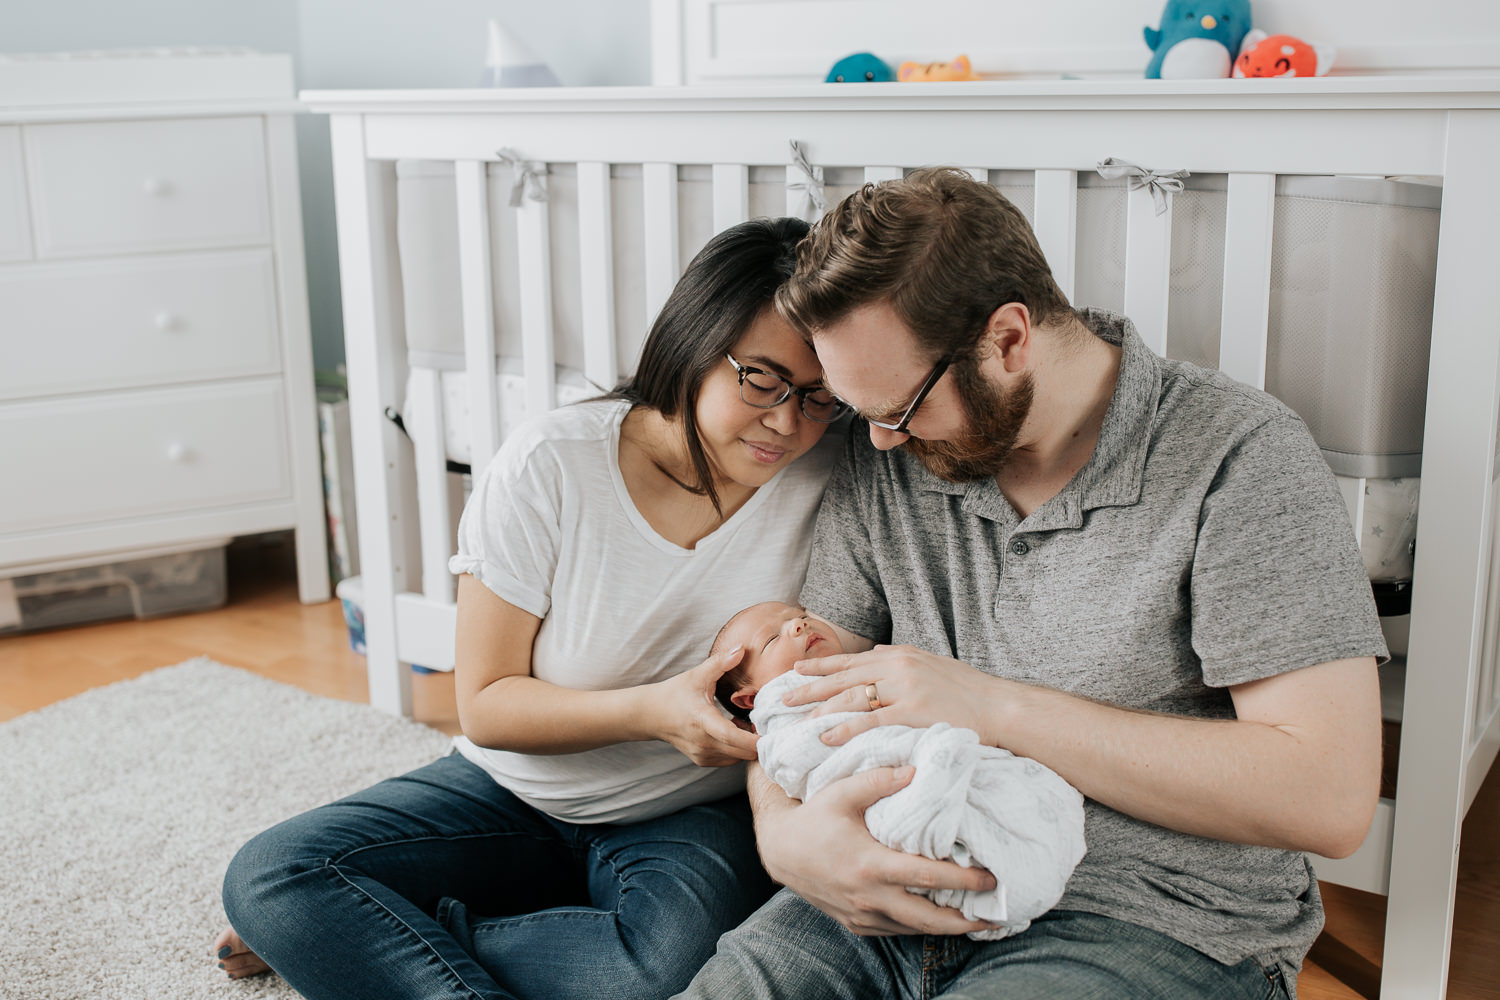 new parents sitting on nursery floor leaning against crib, dad holding 2 week old baby boy in his arms, mom snuggled next to them, looking down at son - Barrie In-Home Photography